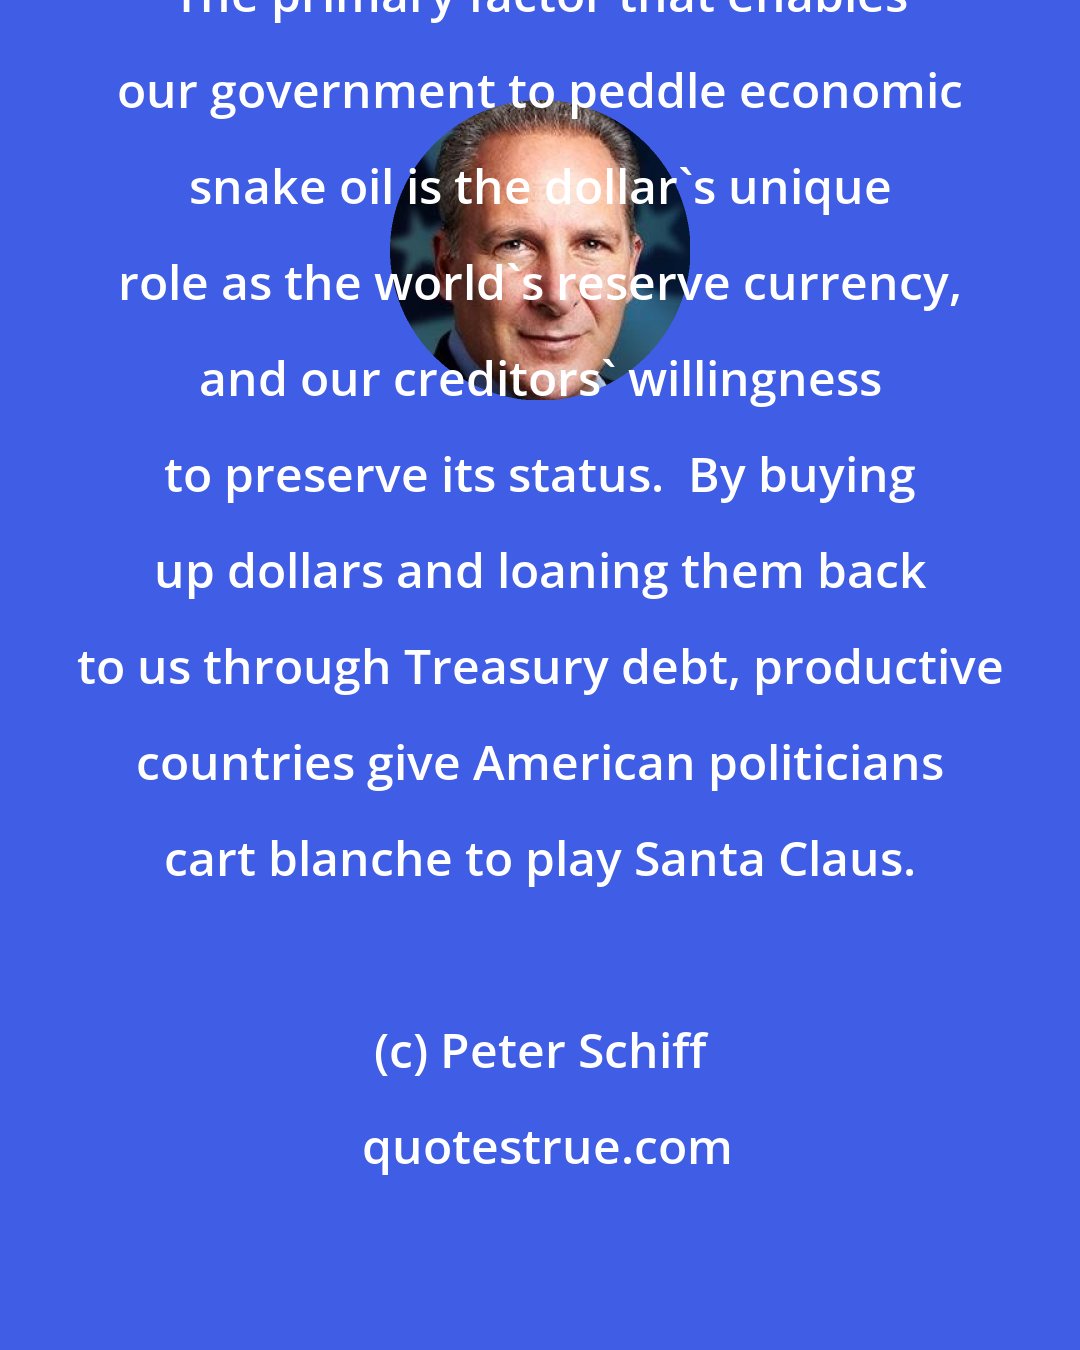 Peter Schiff: The primary factor that enables our government to peddle economic snake oil is the dollar's unique role as the world's reserve currency, and our creditors' willingness to preserve its status.  By buying up dollars and loaning them back to us through Treasury debt, productive countries give American politicians cart blanche to play Santa Claus.